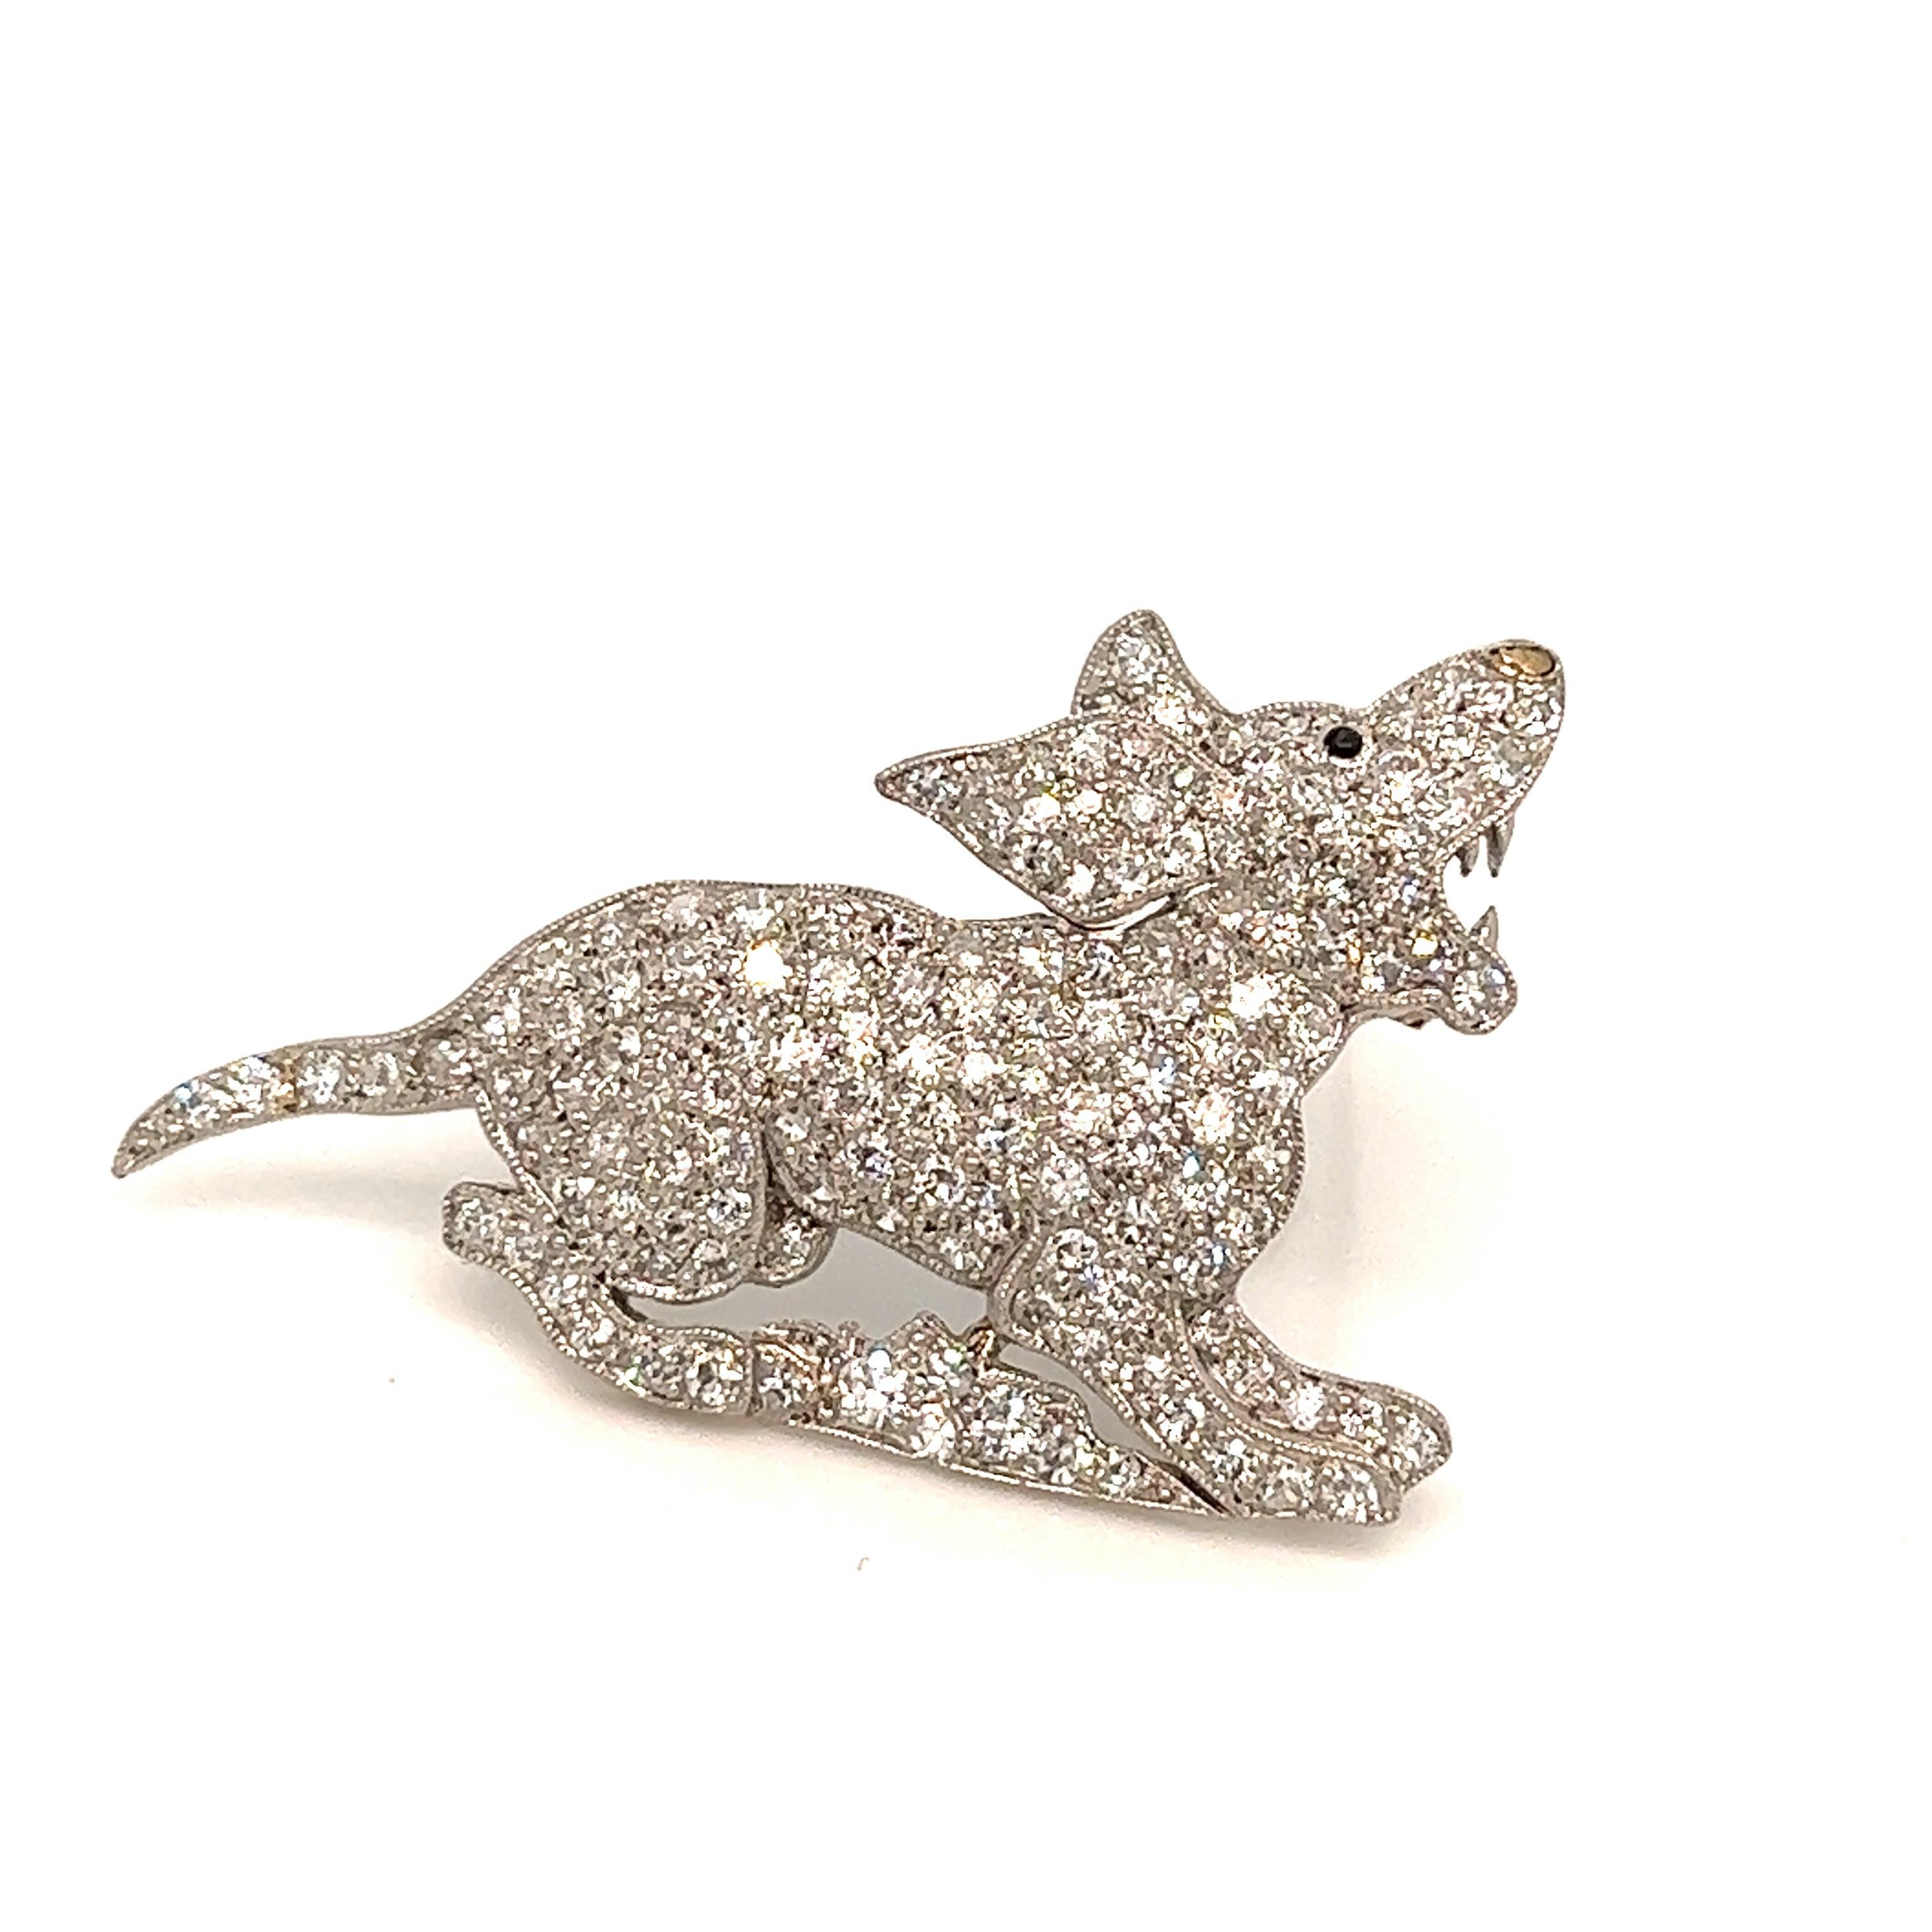 Platinum diamond dog brooch, circa 1930s

Howling dog set with full- and single-cut diamonds, with millegrain accents; platinum

Size: width 1.44 inch, length 1 inch
Total weight: 8.1 grams